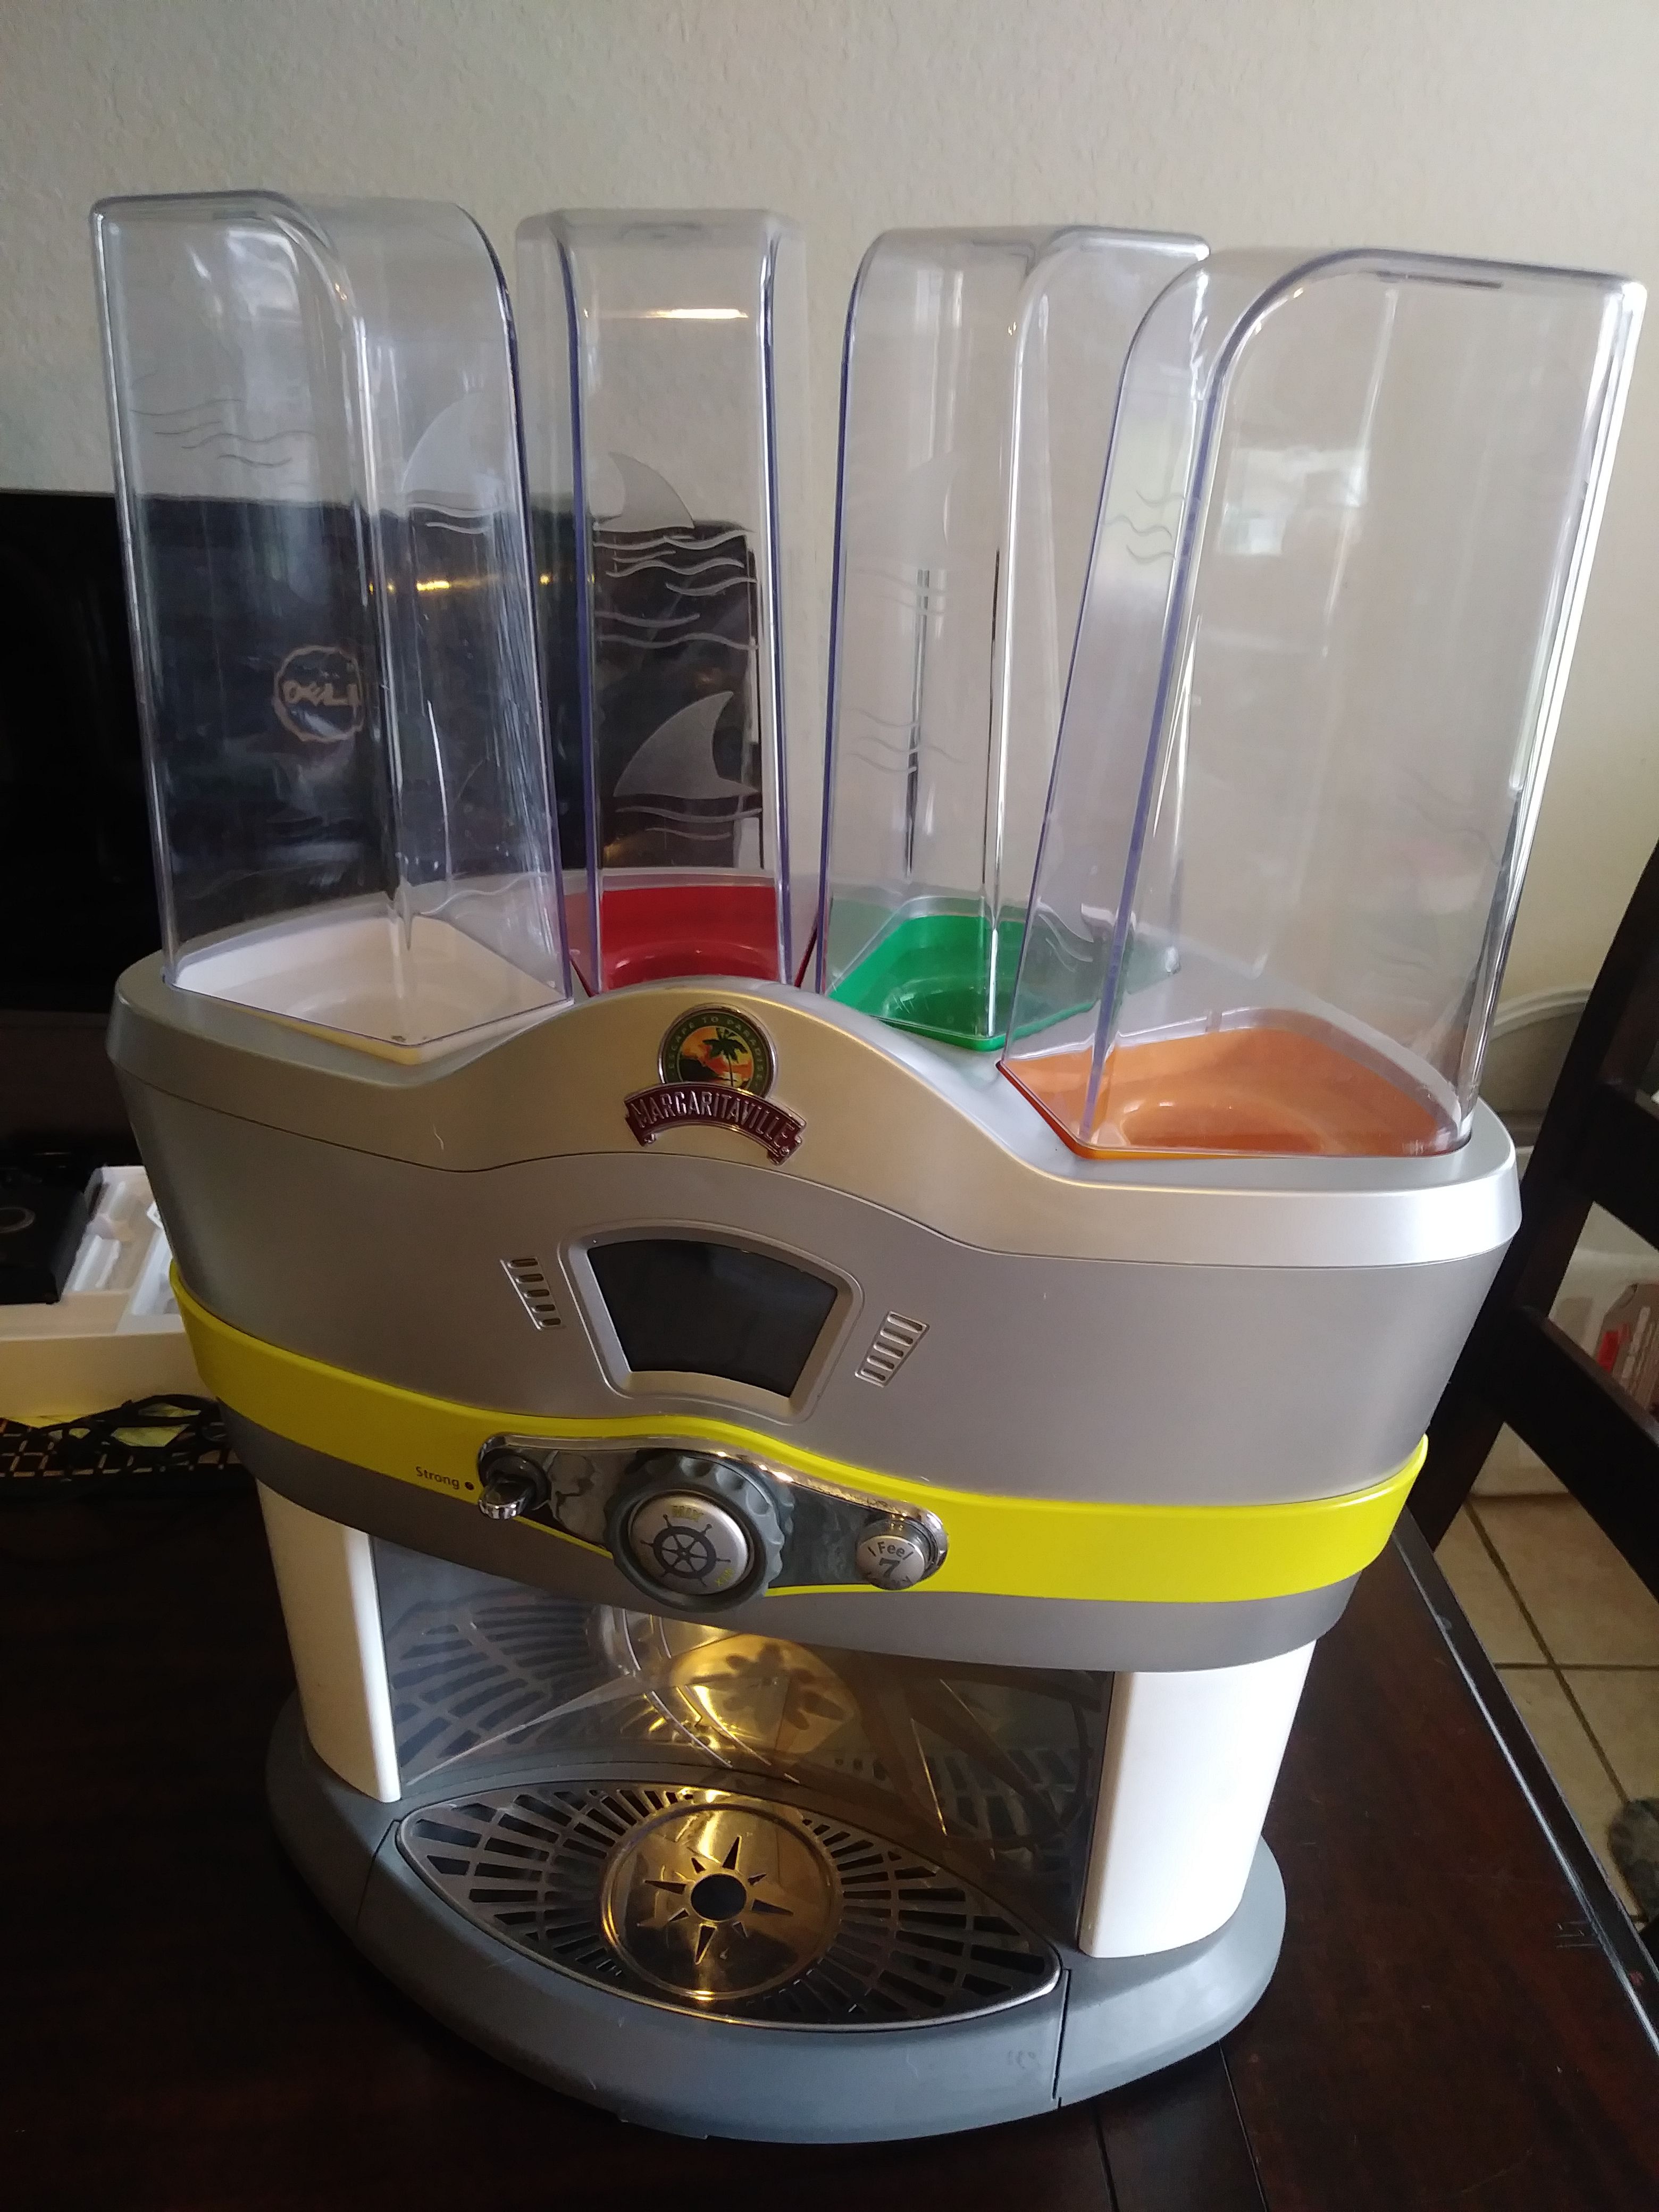 Best Margaritavile Mixed Drink Maker. Automatic Drink Mixer. for sale in  Germantown, Tennessee for 2023